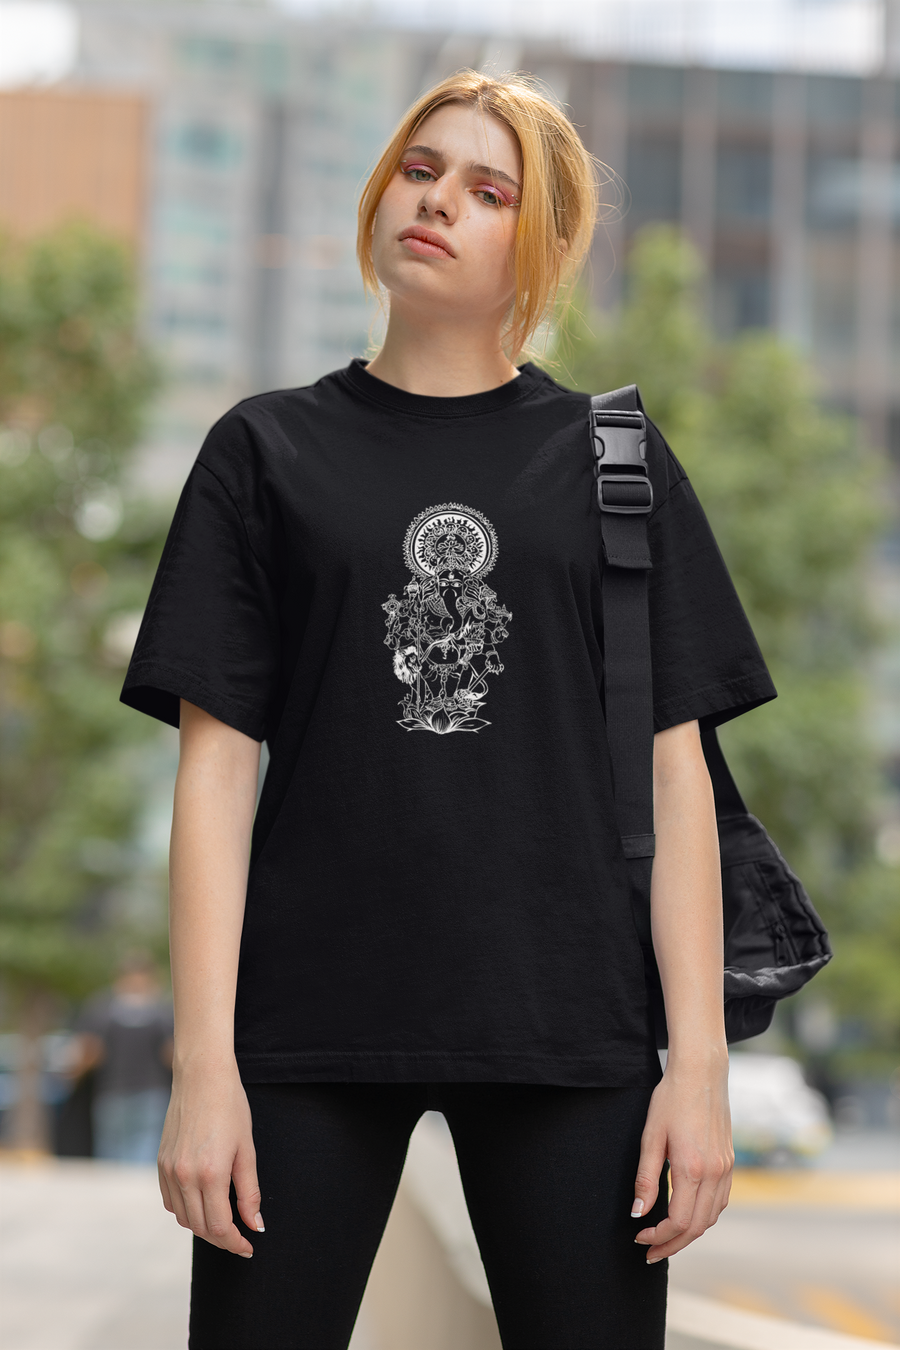 The Blessing Oversize Tee